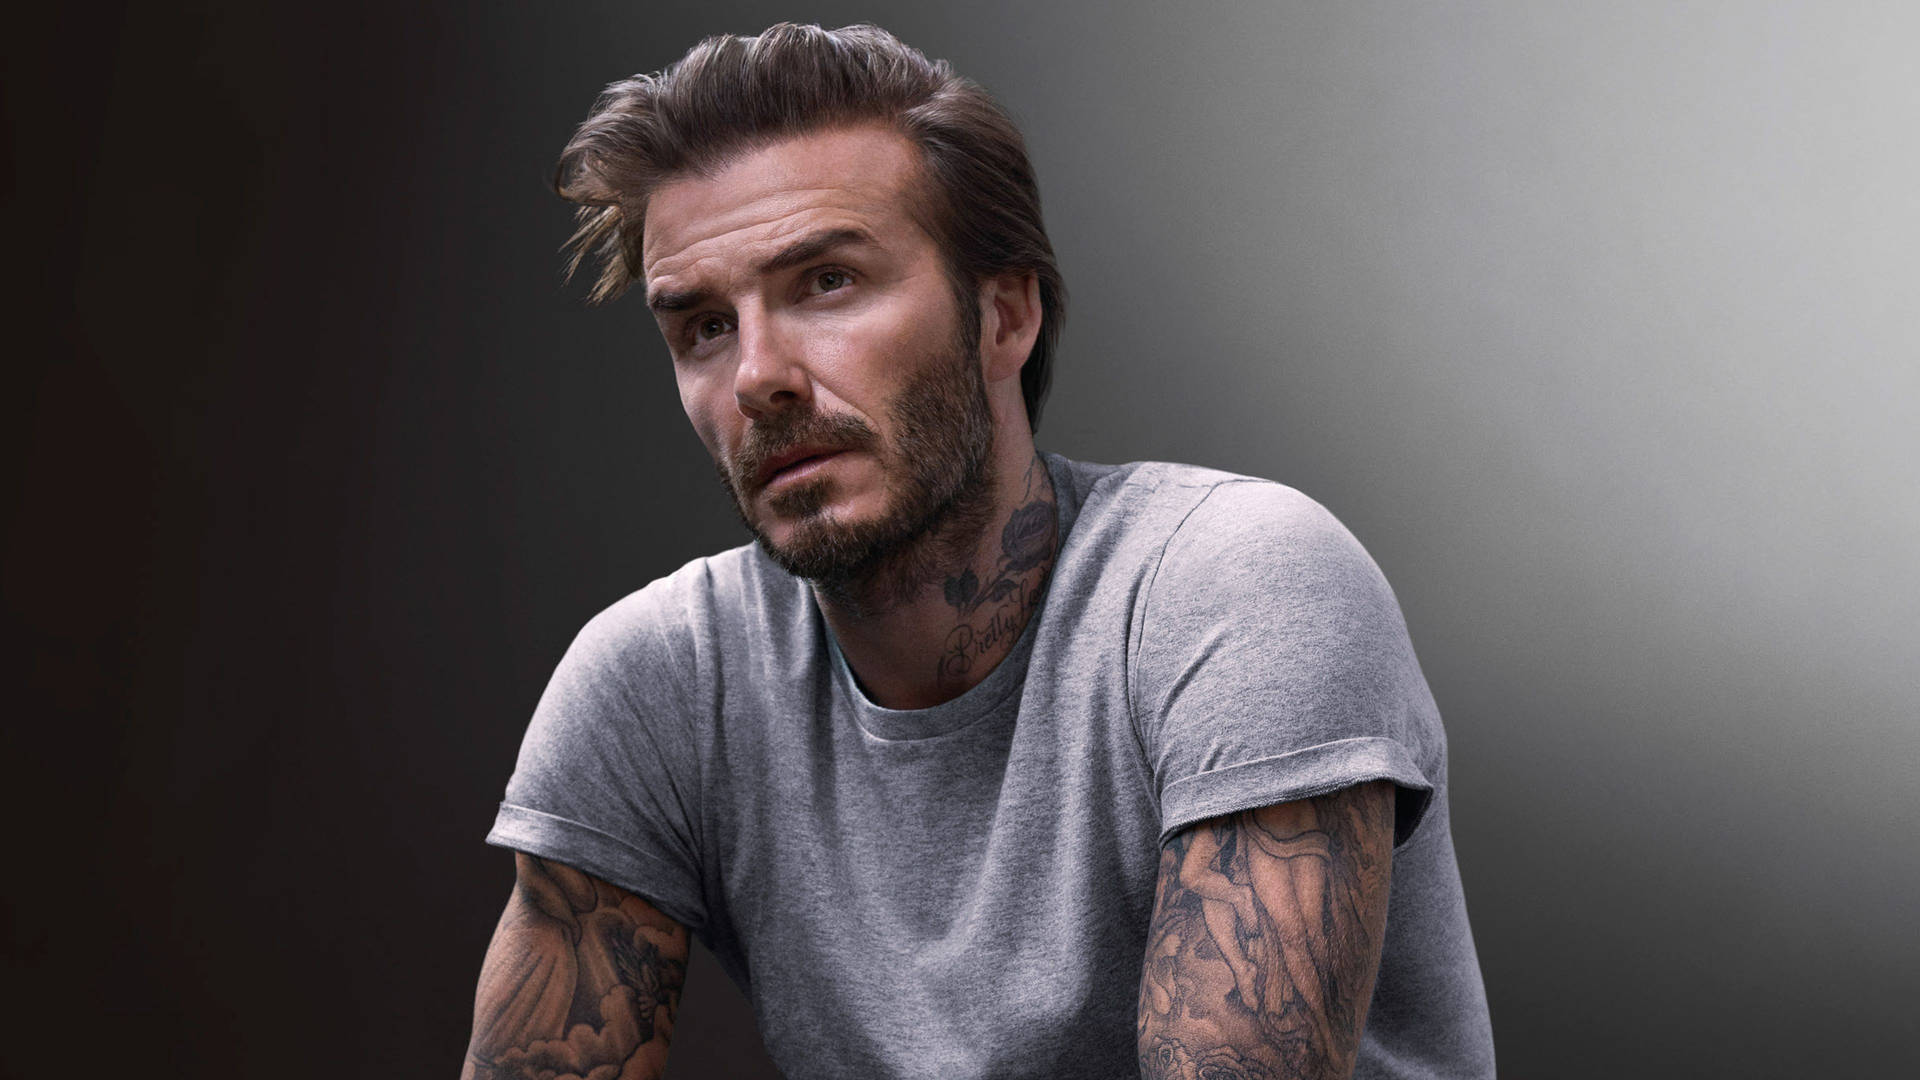 David Beckham Wearing His Iconic Style For H&m's Bodywear Collection. Background